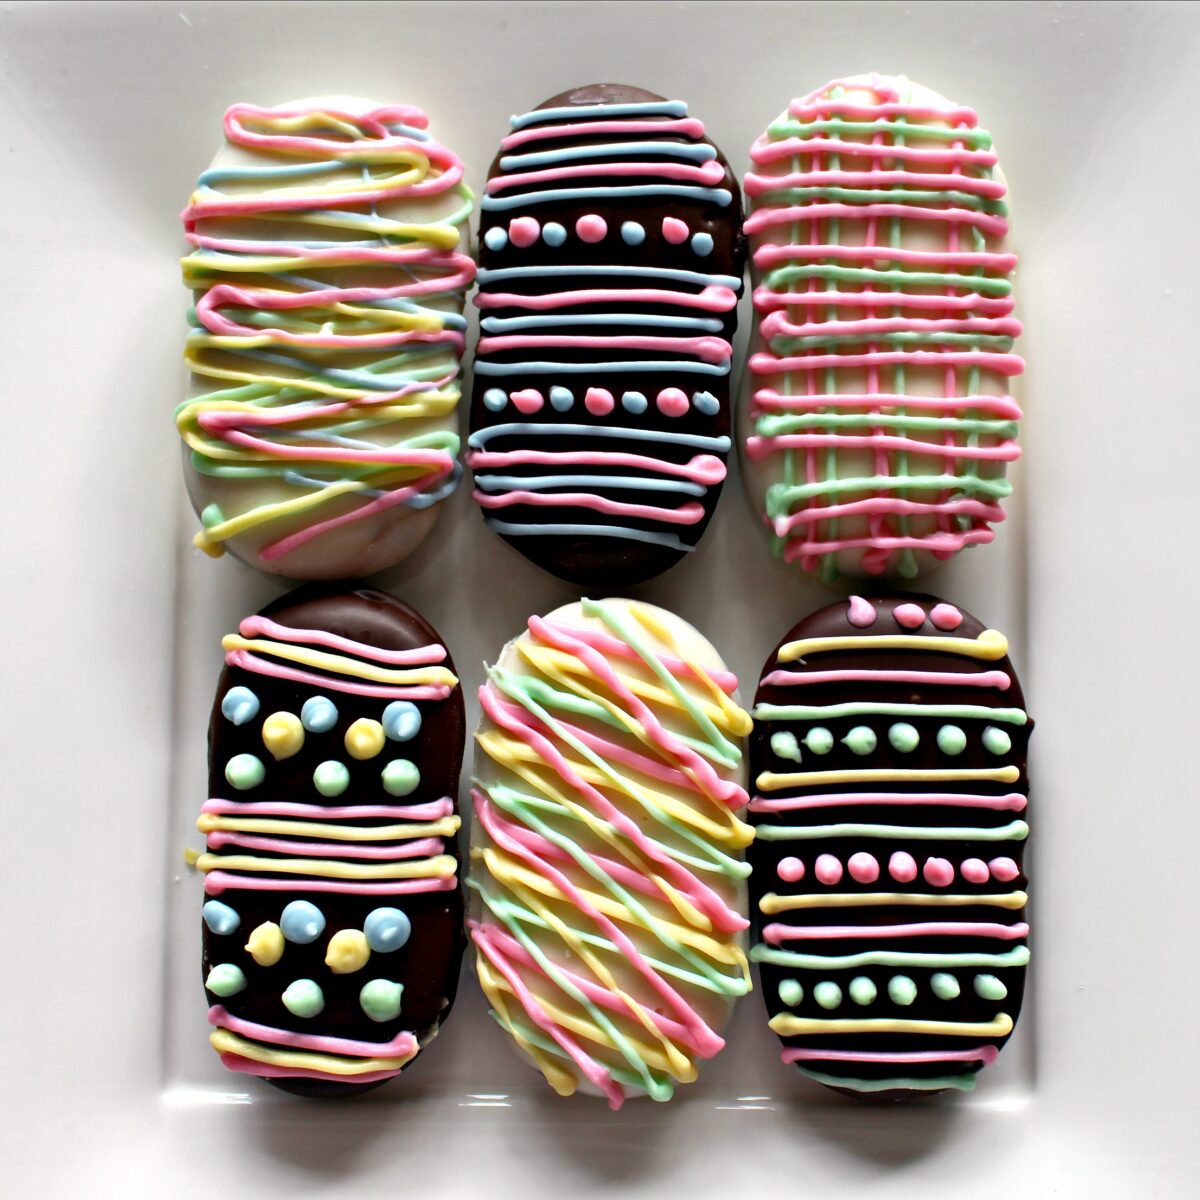 Milano Cookies covered in chocolate and decorated in pastels to look like easter eggs.